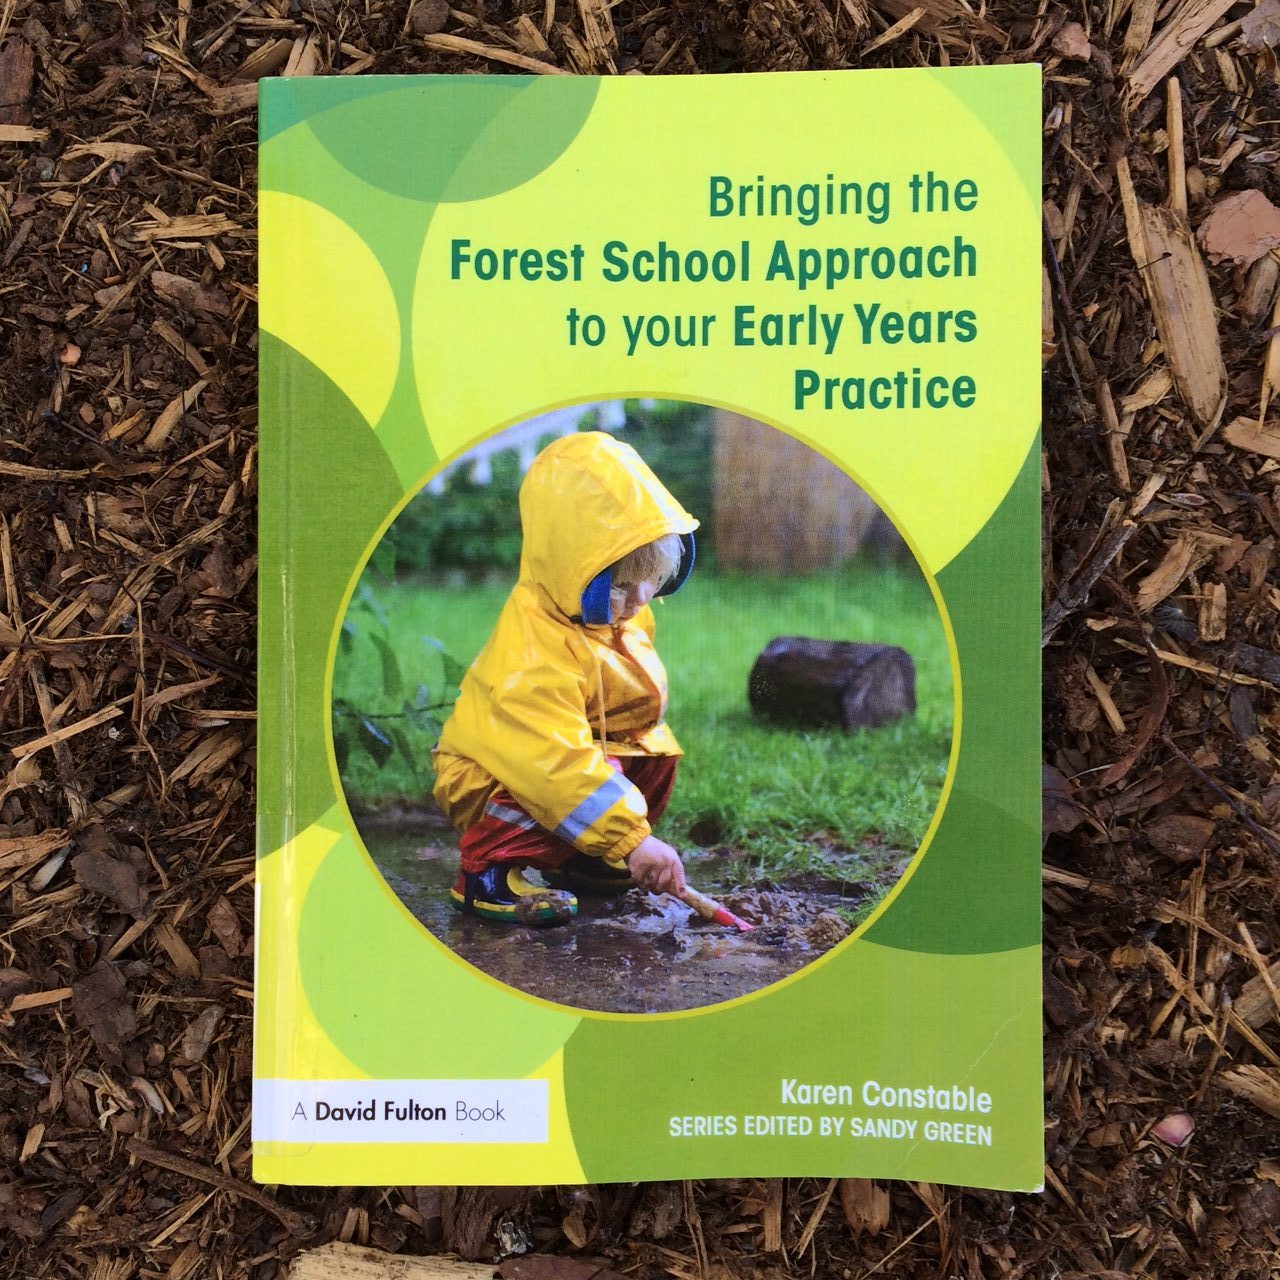 research on forest school practice